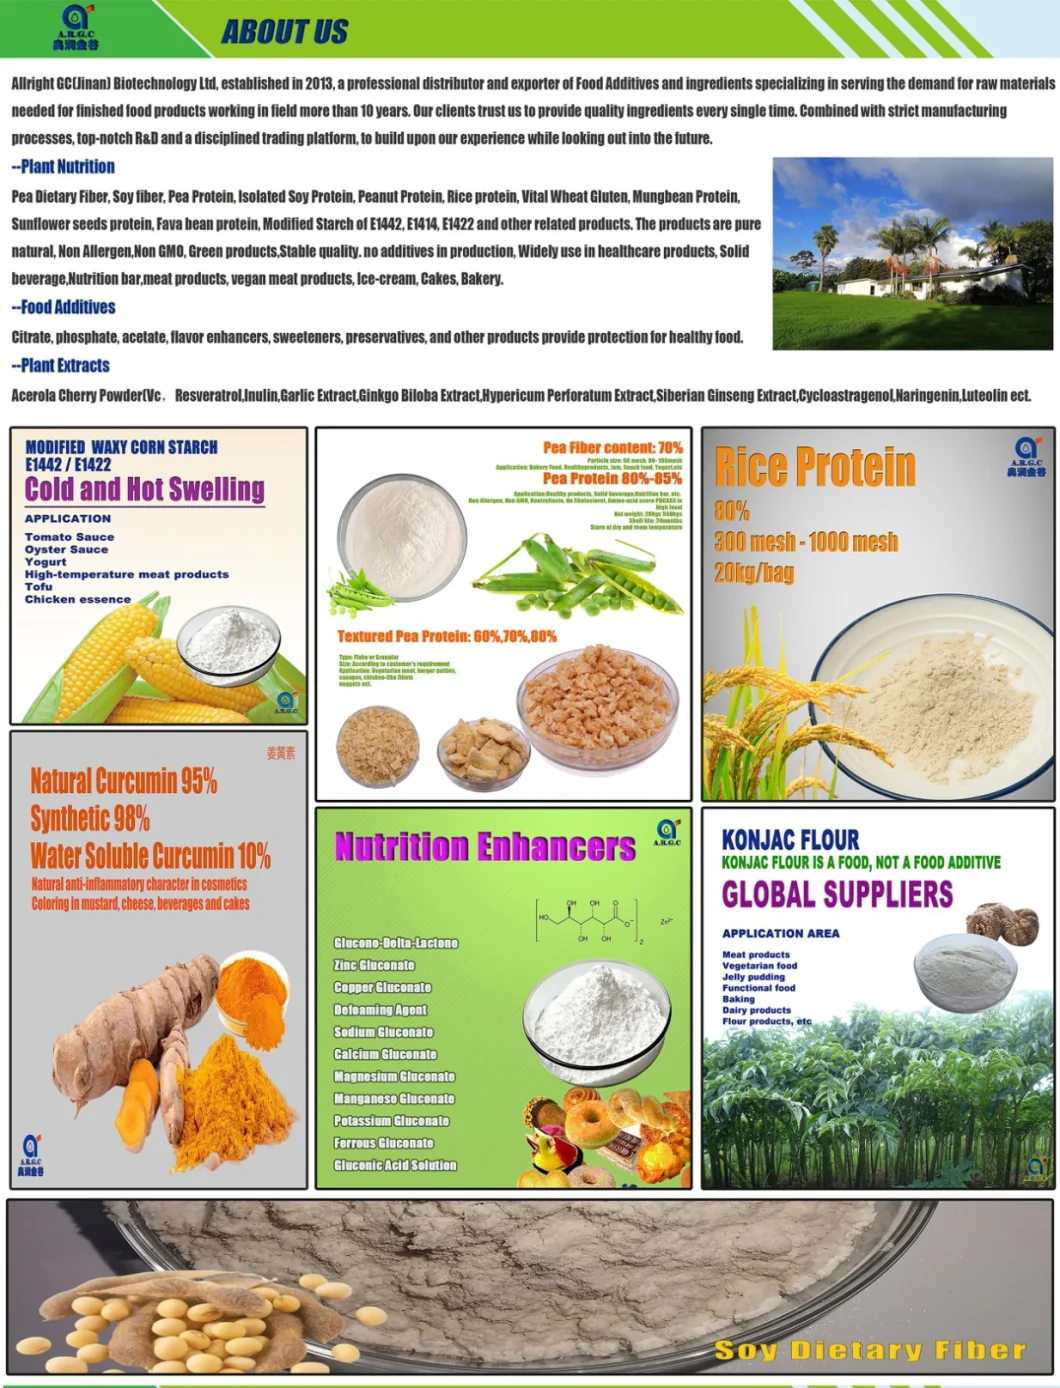 Non GMO Soybean Base Soy Fiber/Soy Dietary Fiber for Sausage and Others